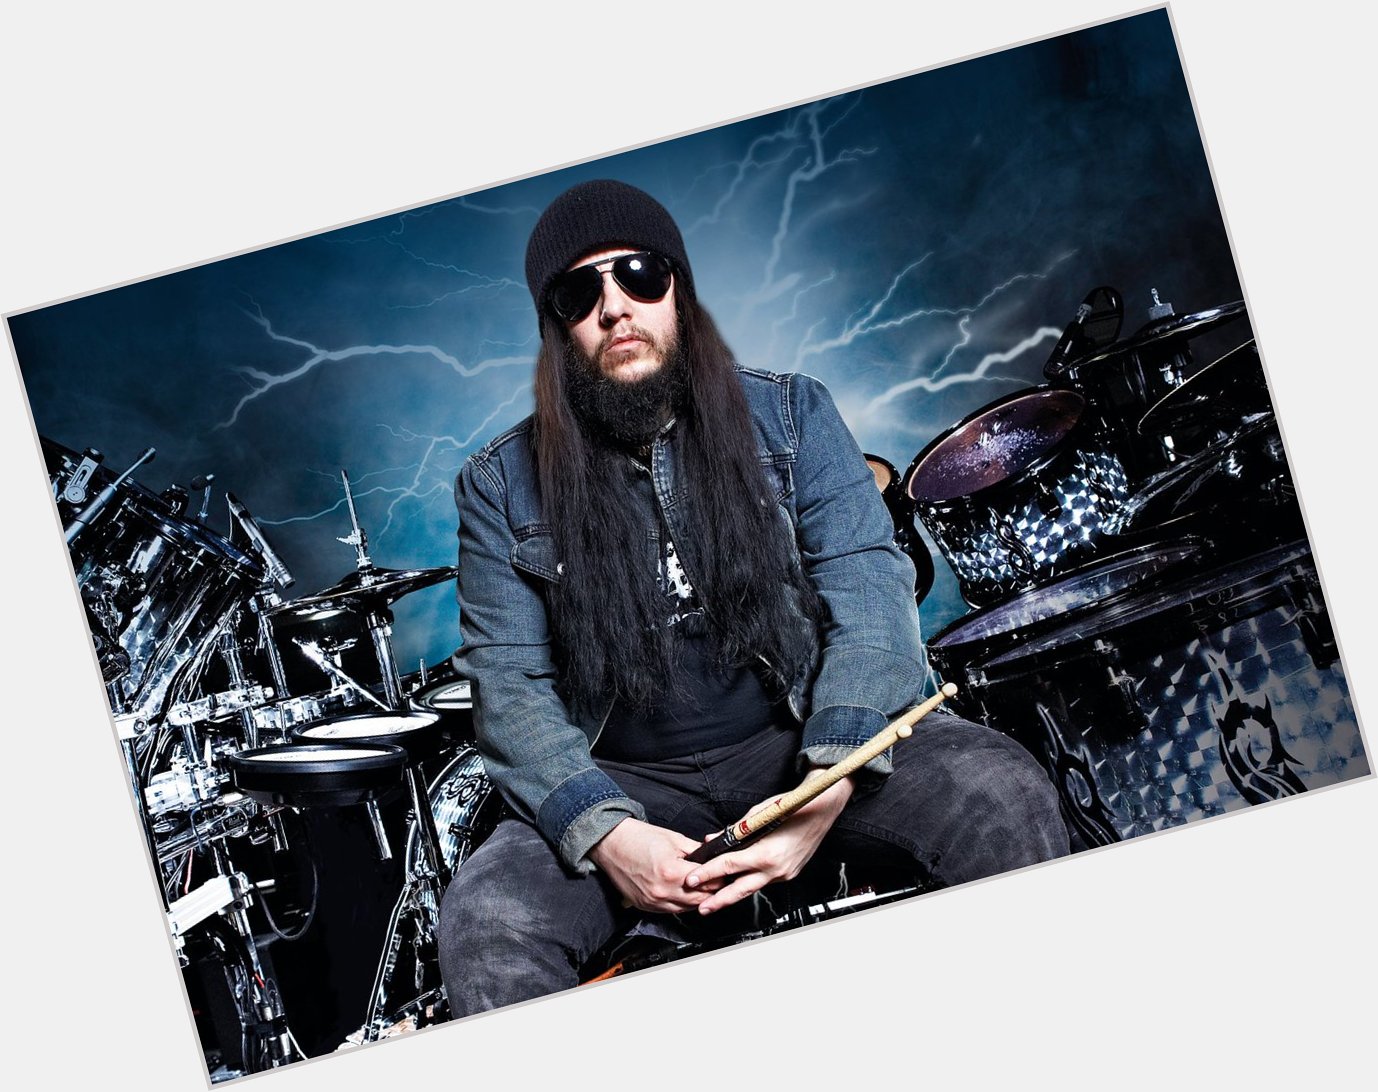 Happy 42nd Birthday to Joey Jordison (SLIPKNOT, MURDERDOLLS) who was given his first drum kit at the age of 8. 